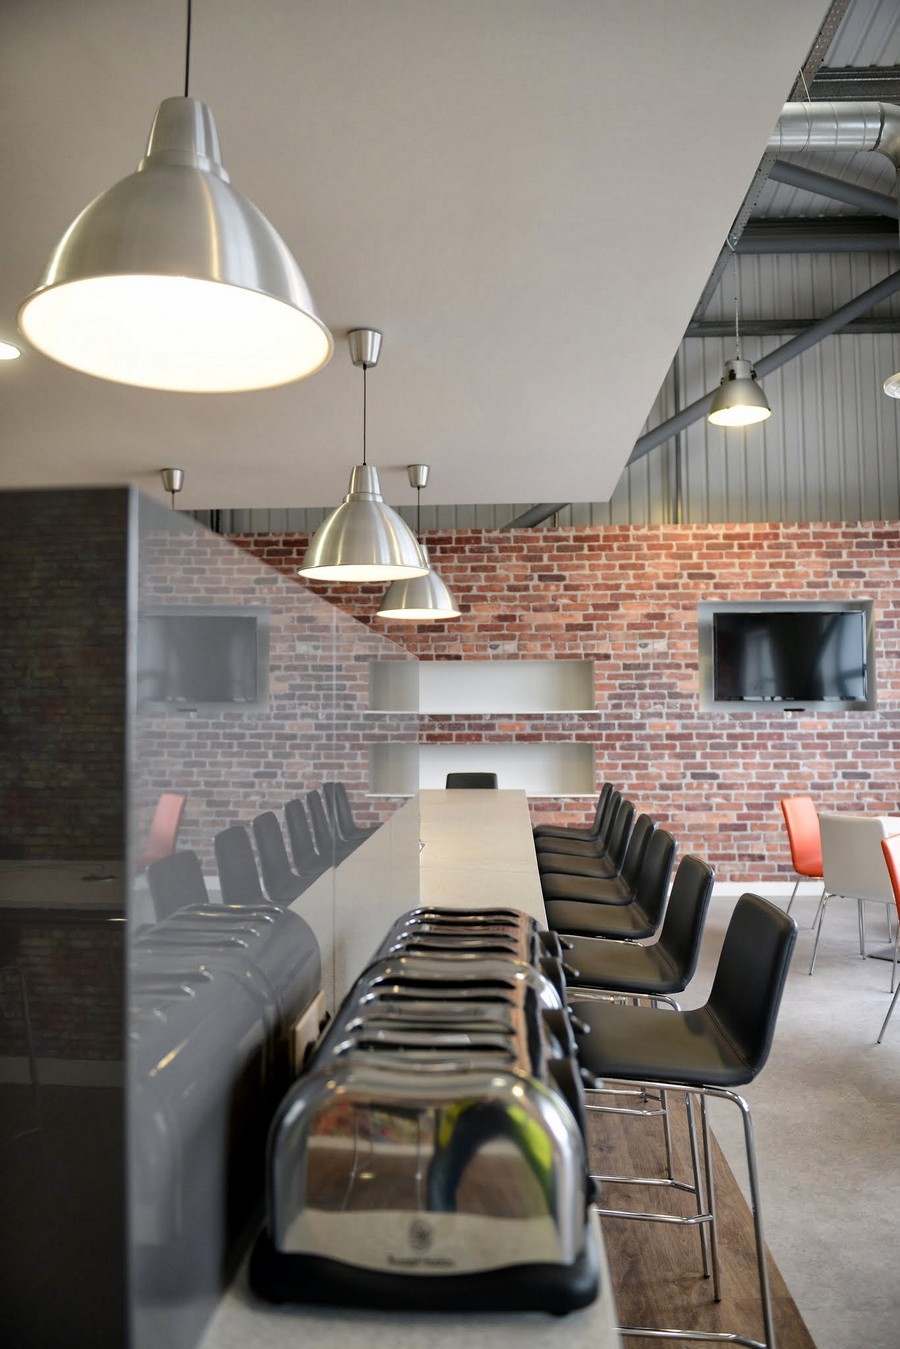 Room Space Nsg Fascinating Room Space Design Of NSG Modern Offices With Several Black Colored Stools Which Has Silver Stainless Feet  Elegant And Modern Dining Room Sets With Wonderful Brick Walls